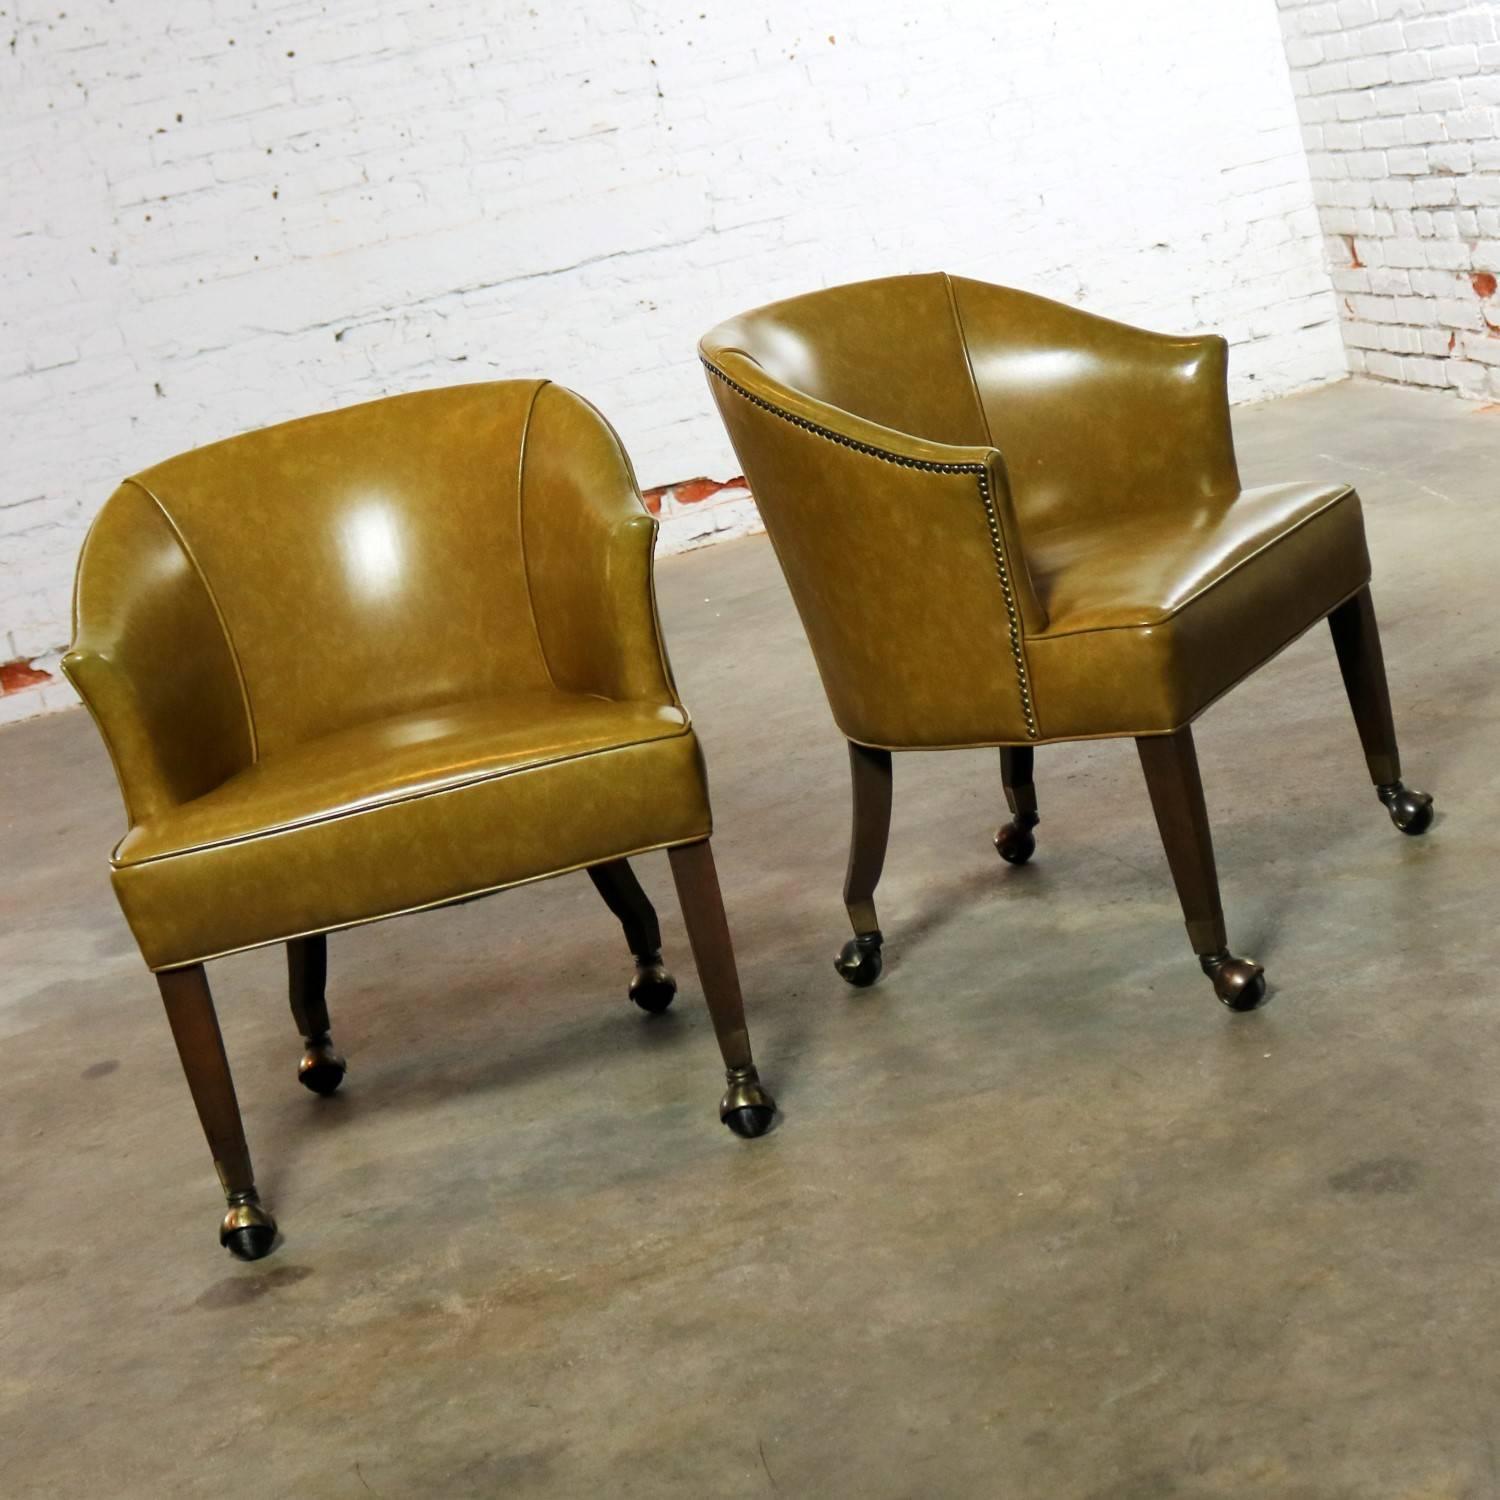 American Pair of Midcentury Naugahyde Olive Green Rolling Barrel Chairs Nail Head Accent